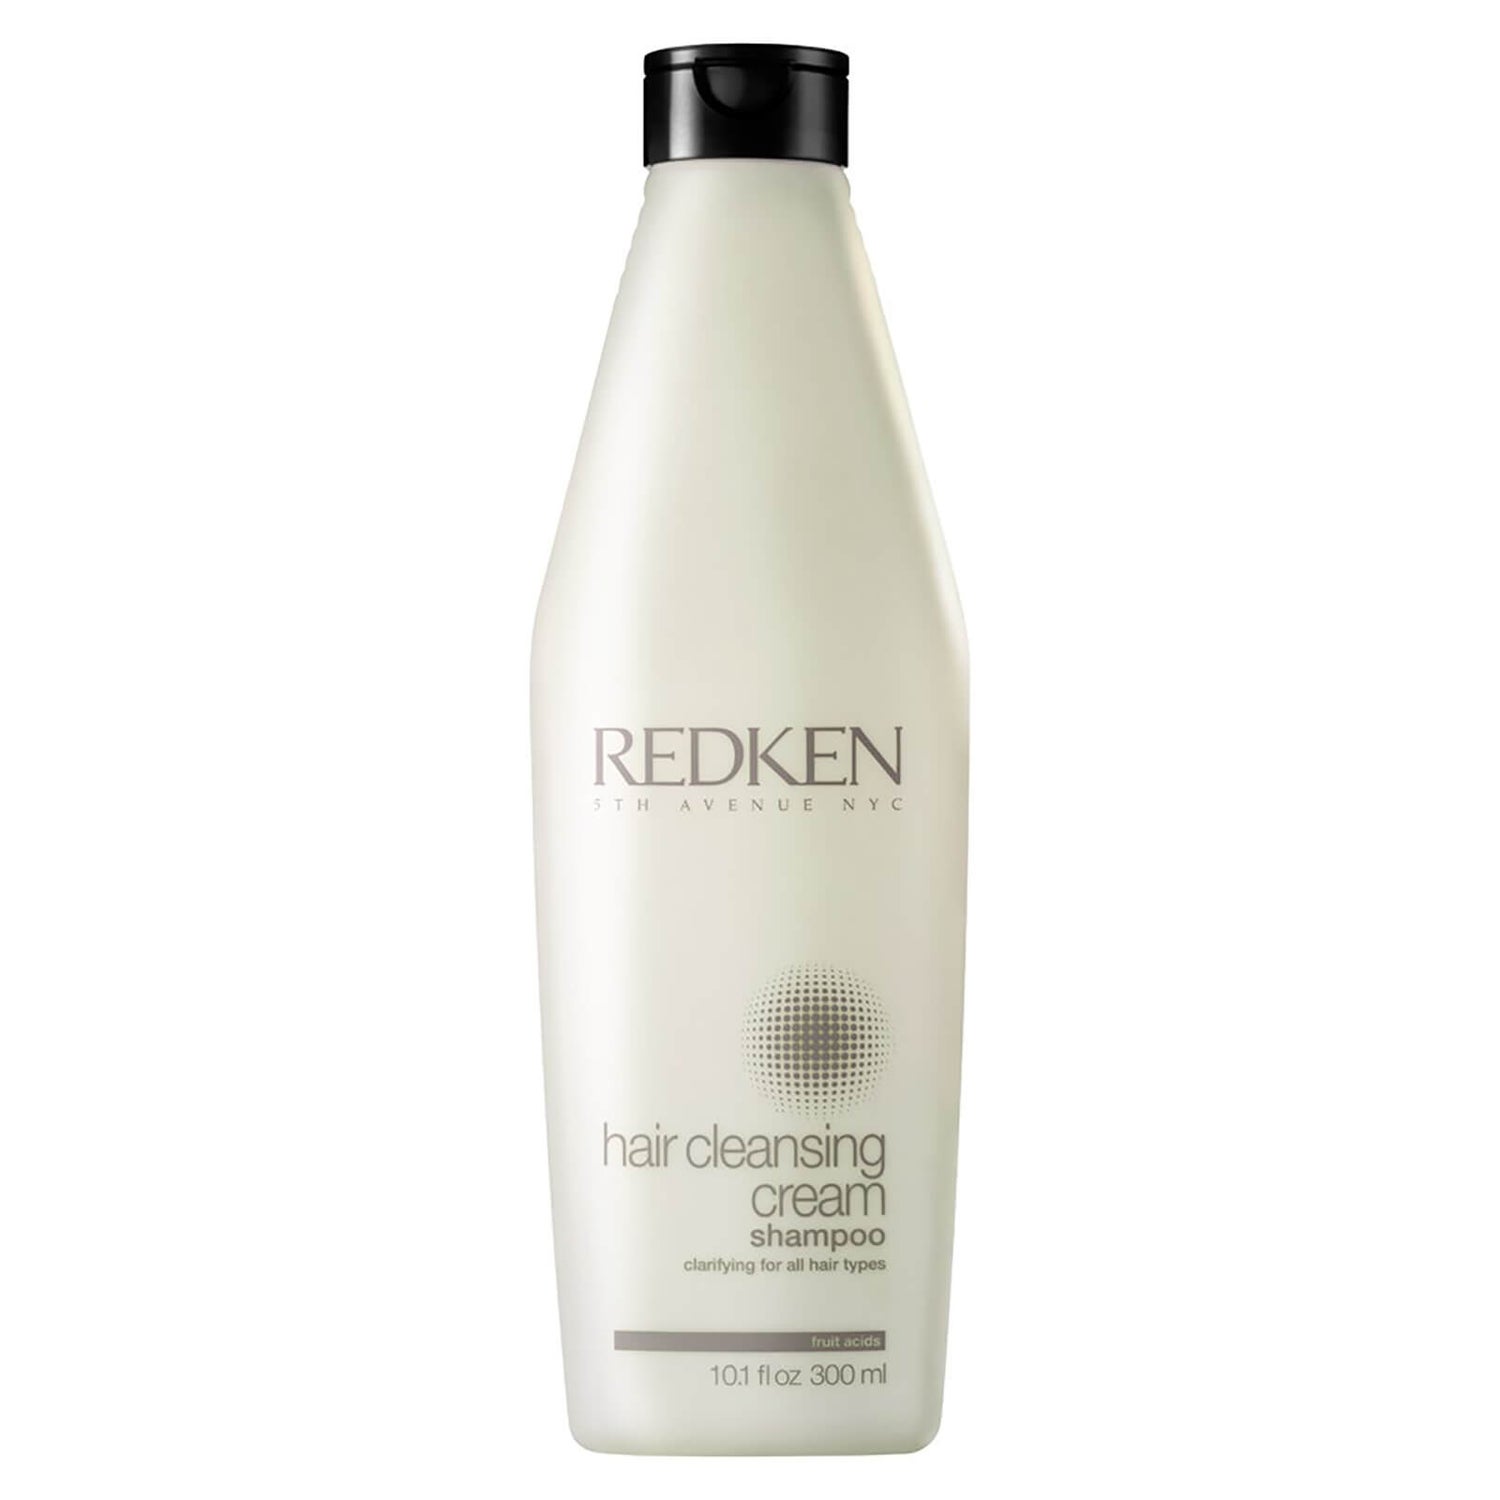 Hair Cleansing Cream Shampoo  Hair Cleansing and Dandruff  Haircare   Products  Redken